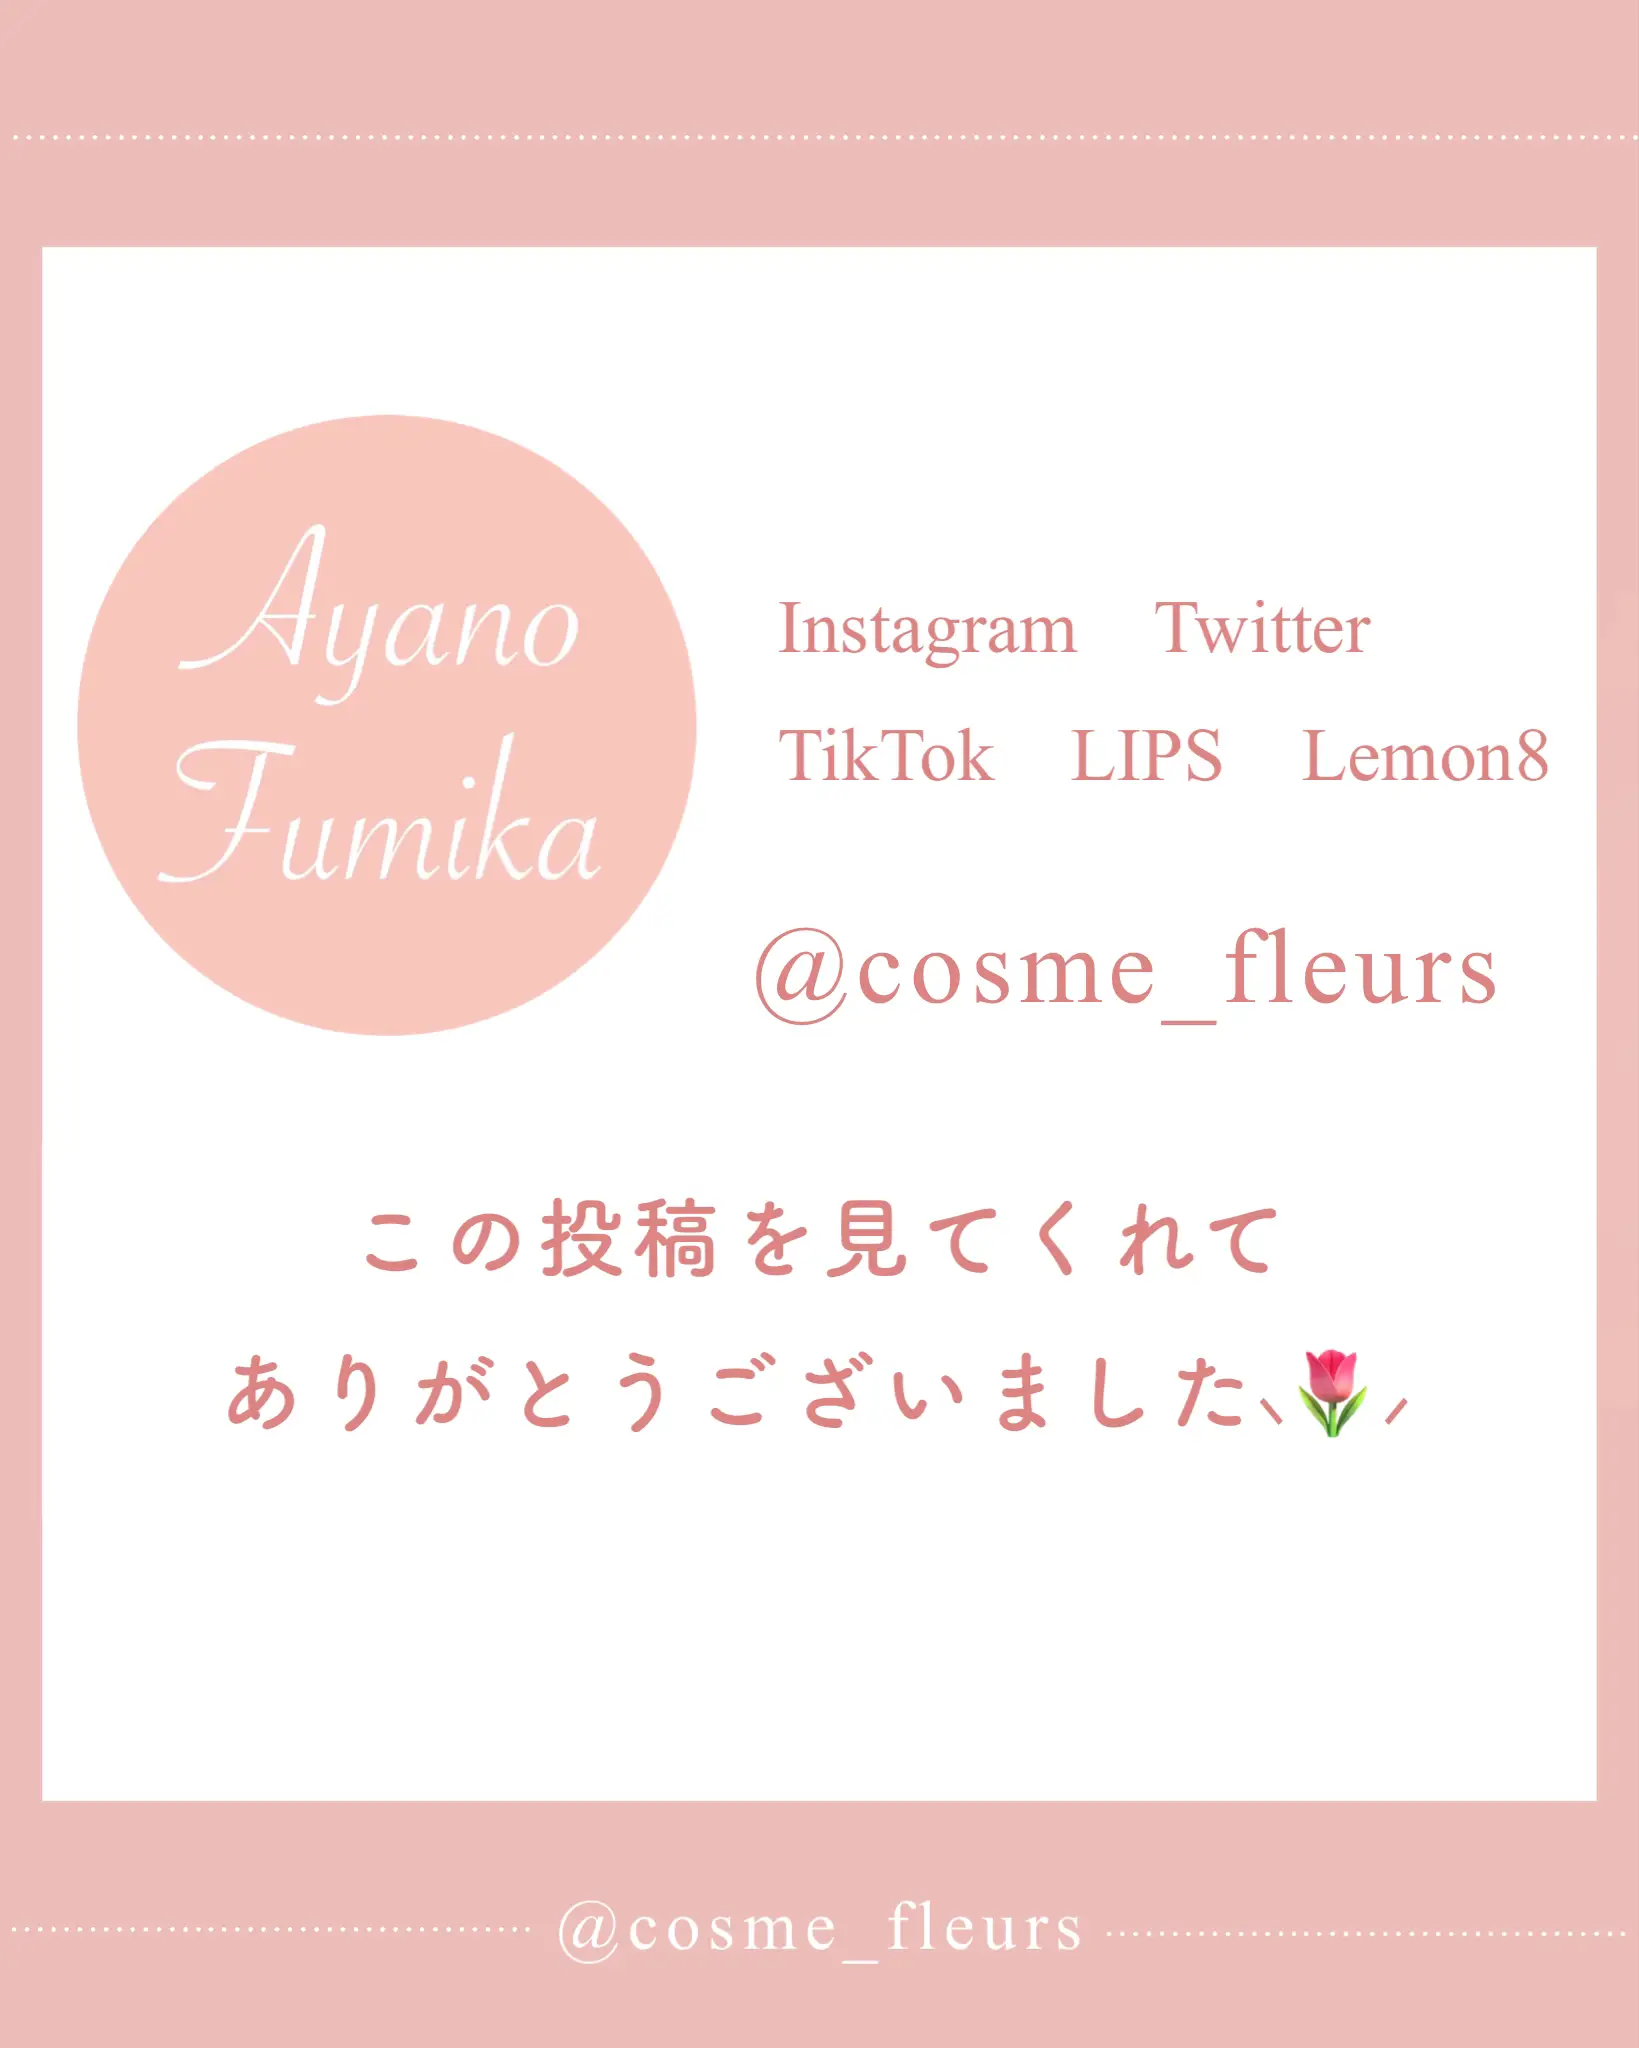 fumikaさんへ♡ありがとうございます | camillevieraservices.com